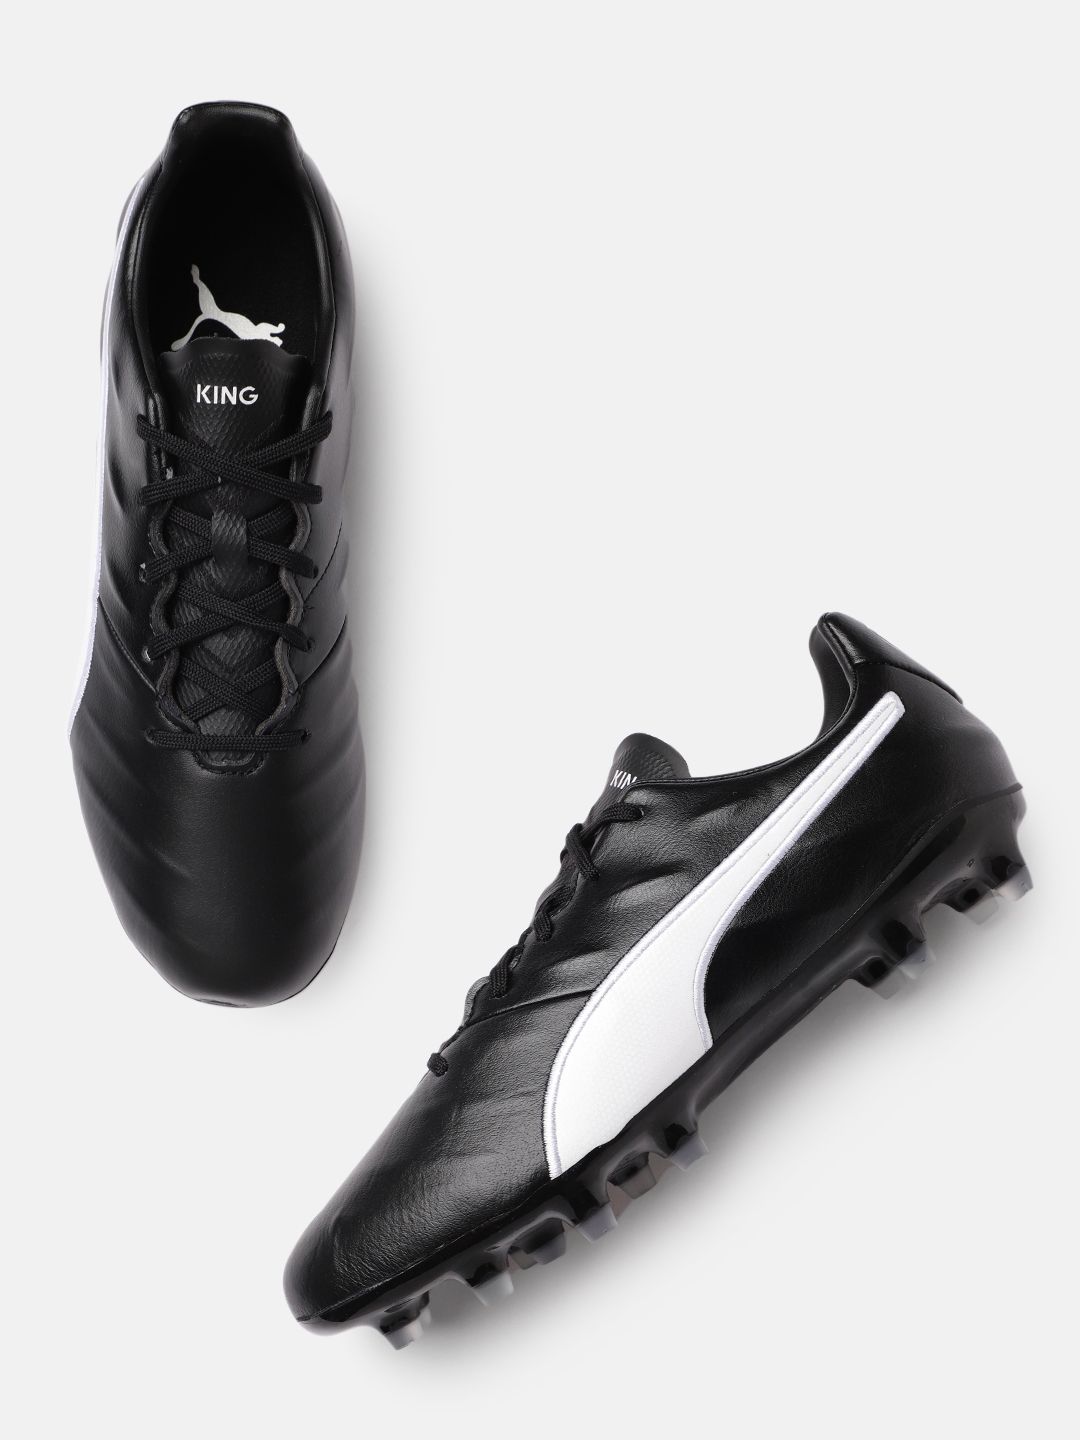 Puma Unisex Black King Pro 21 Leather Football Shoes Price in India